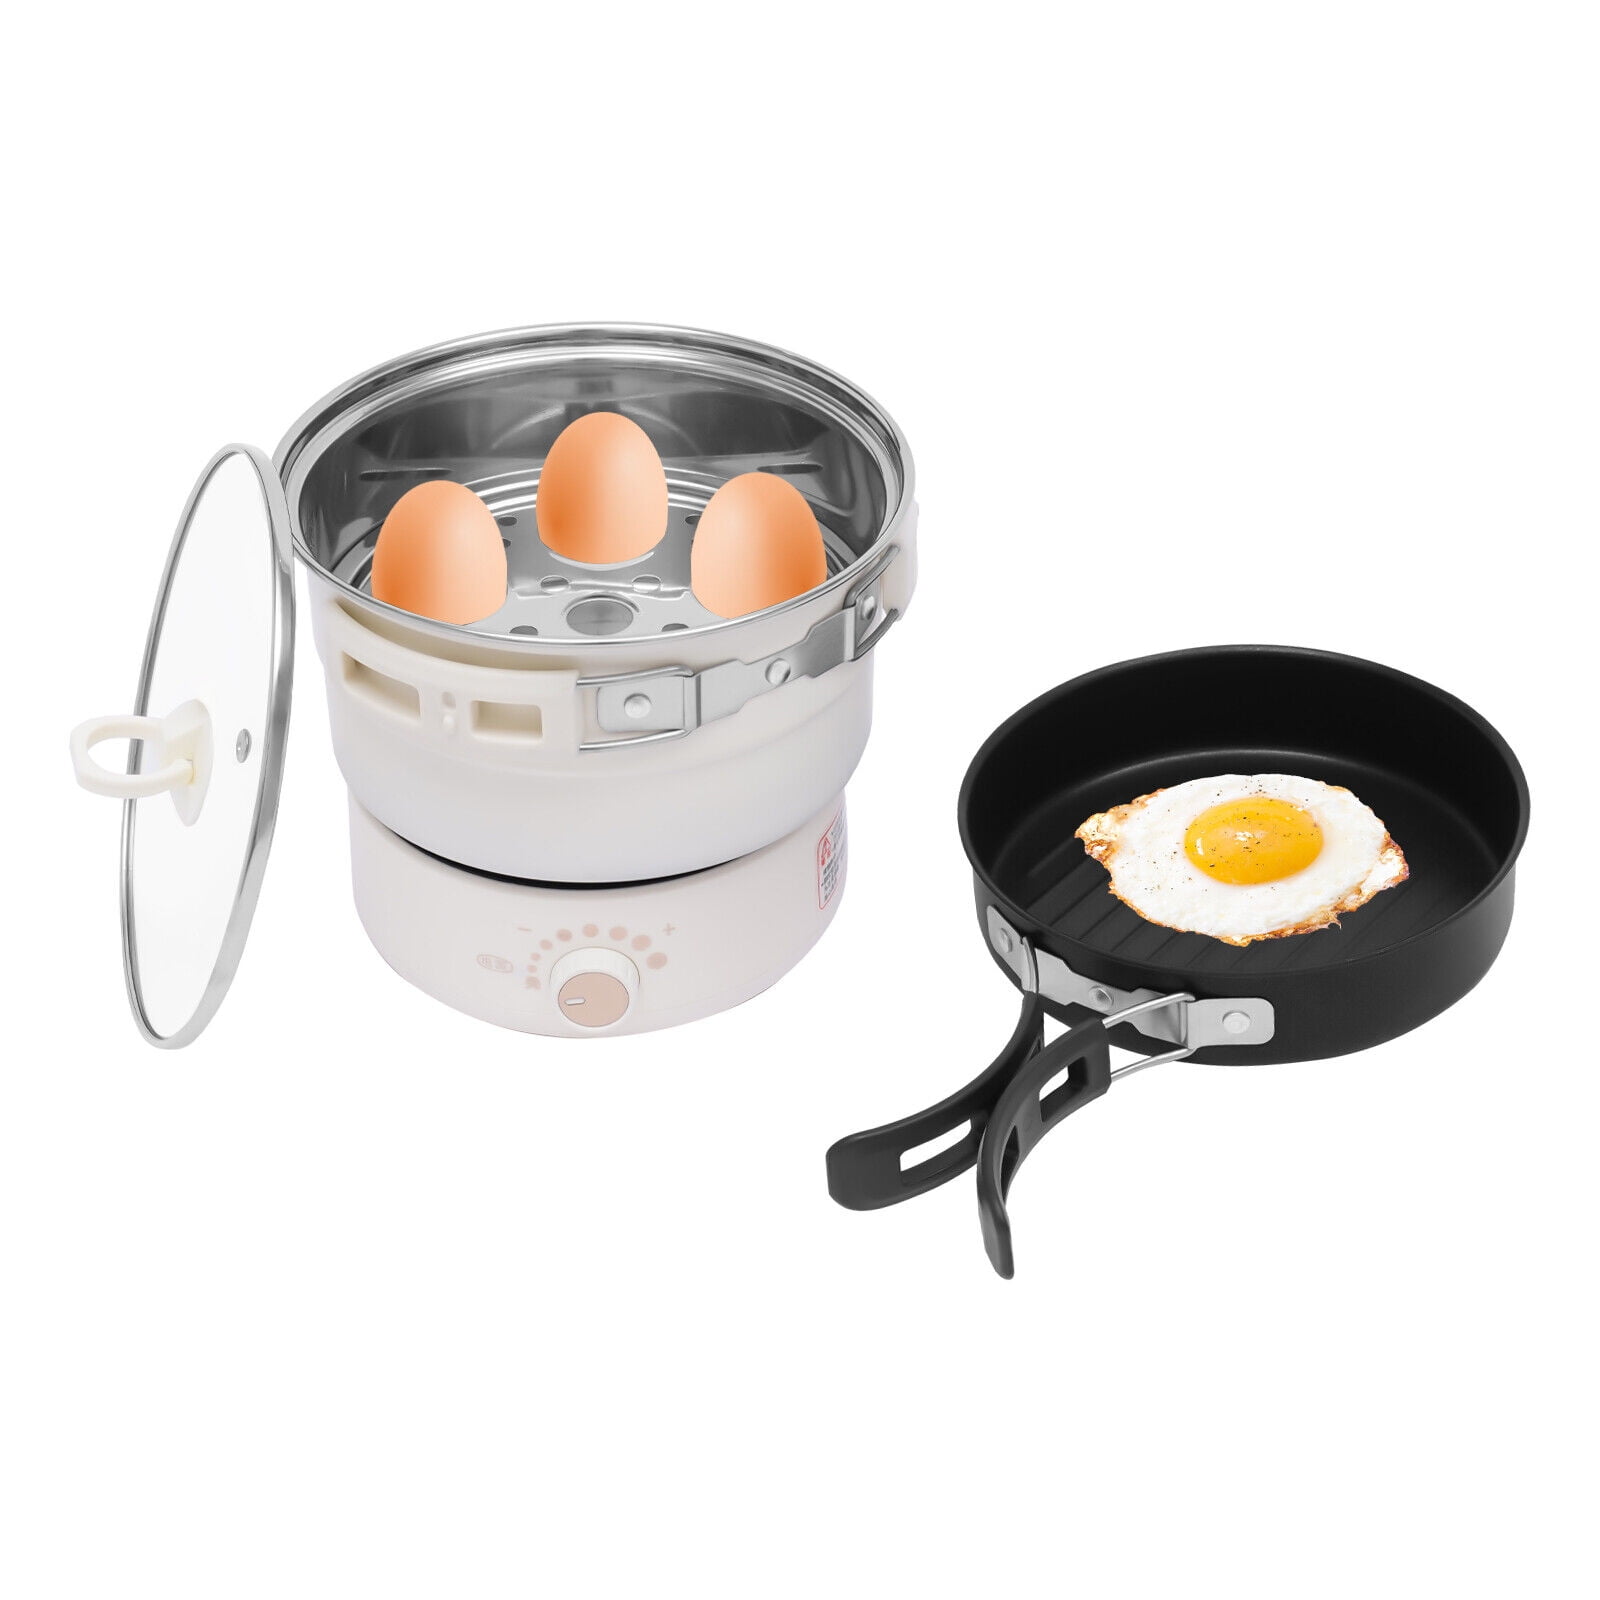 Electric Pot With Steamer, Non-stick Electric Cooker, Ramen Cooker, Electric  Hot Pot With Dual Power Control For Pasta, Noodles,steak,egg, Nonstick  Frying Pan, Portable Pot With Foldable Handle, Mini Pot, Electric Skillet  For